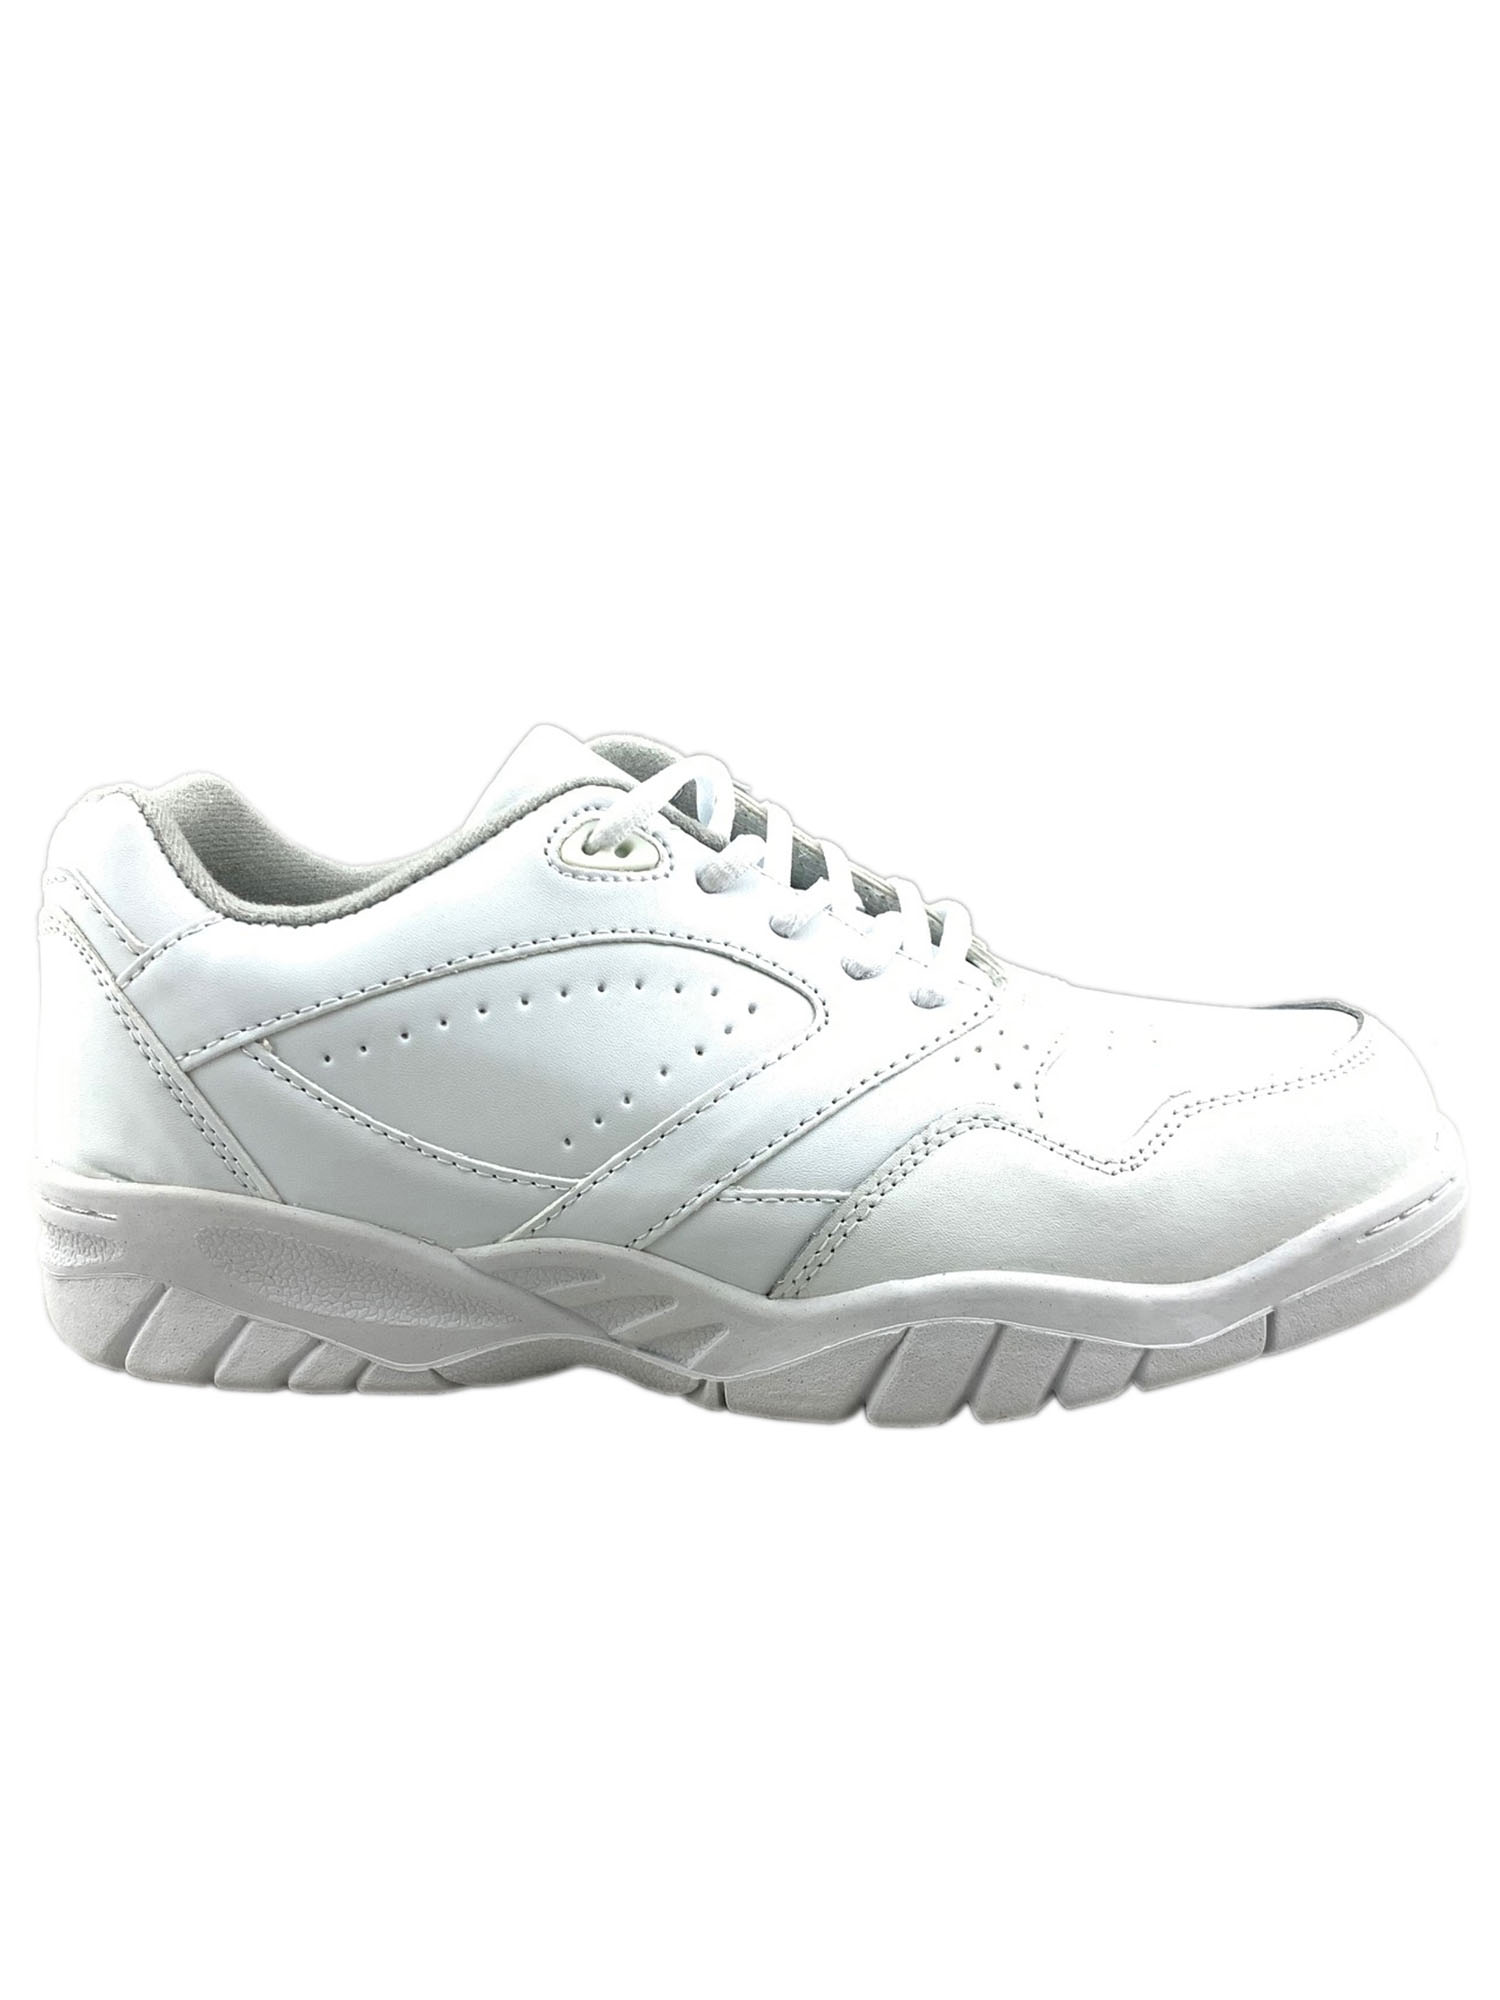 Tanleewa Men's Leather White Sports Shoes Lightweight Sneakers Breathable Casual Shoe Size 15 - image 1 of 5